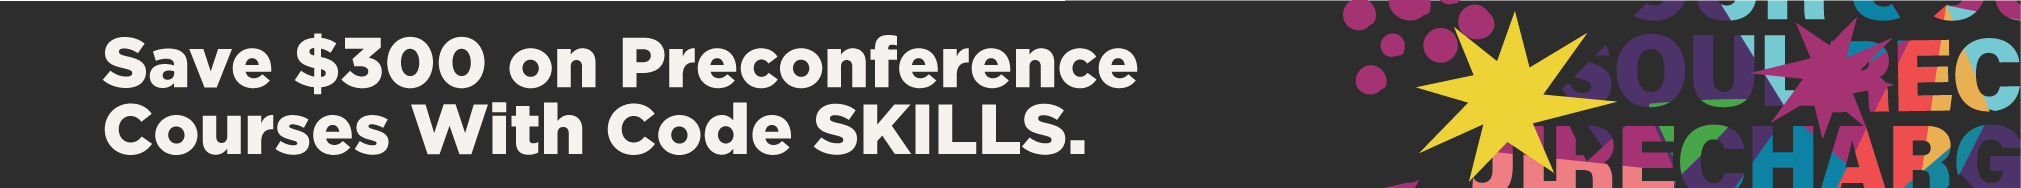 Save $300 on Preconference Courses With Code SKILLS.